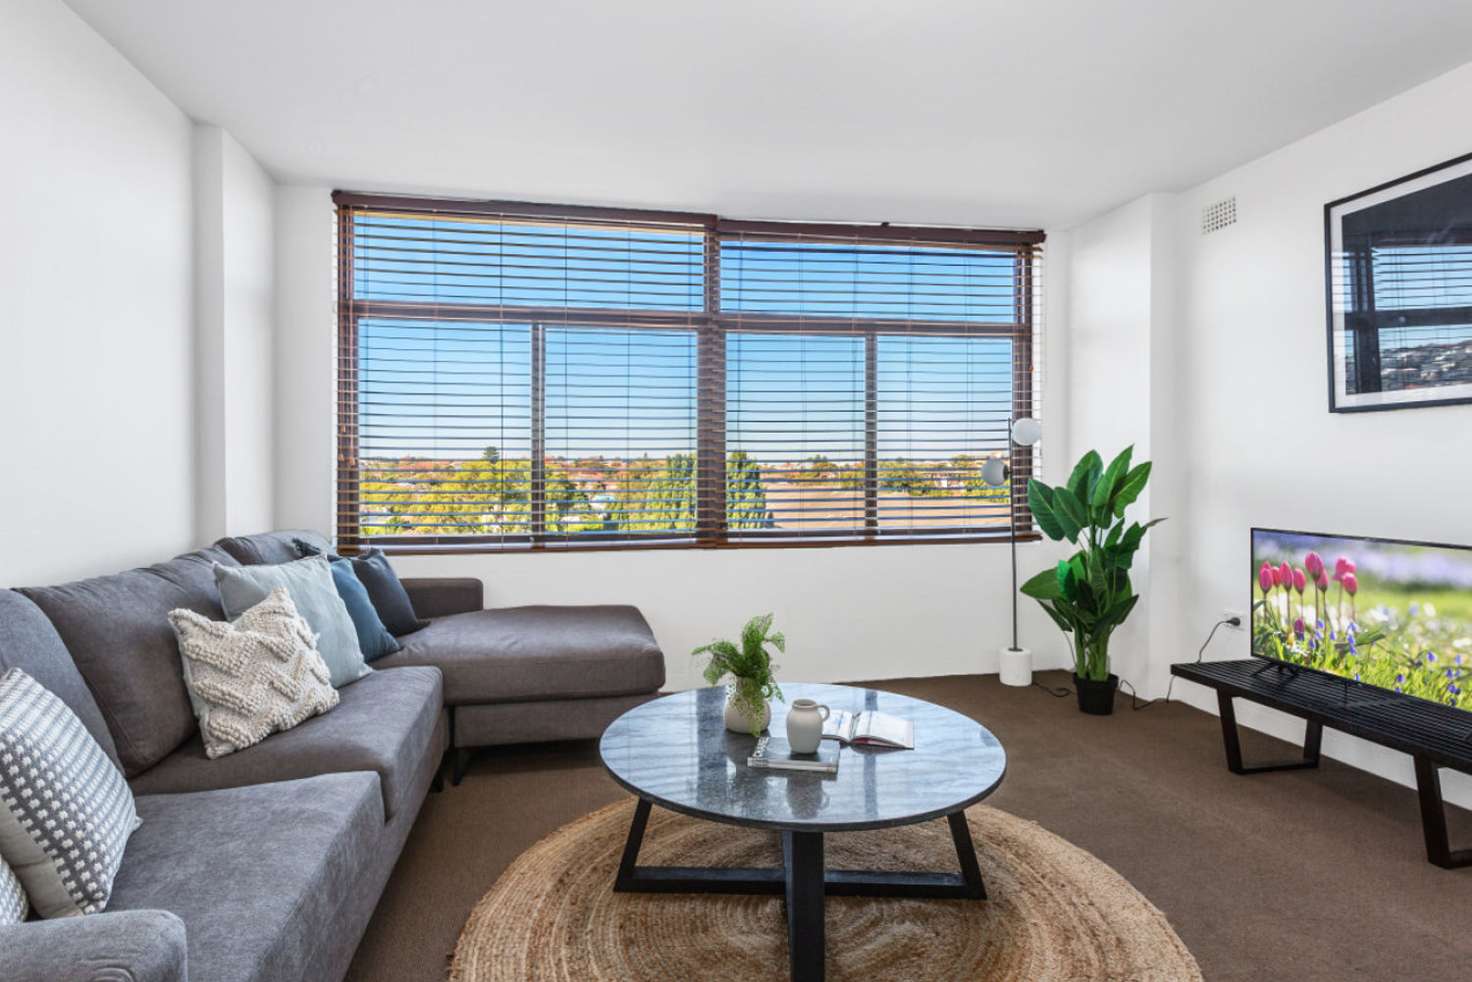 Main view of Homely apartment listing, 45/355-357 Old South Head Rd, North Bondi NSW 2026